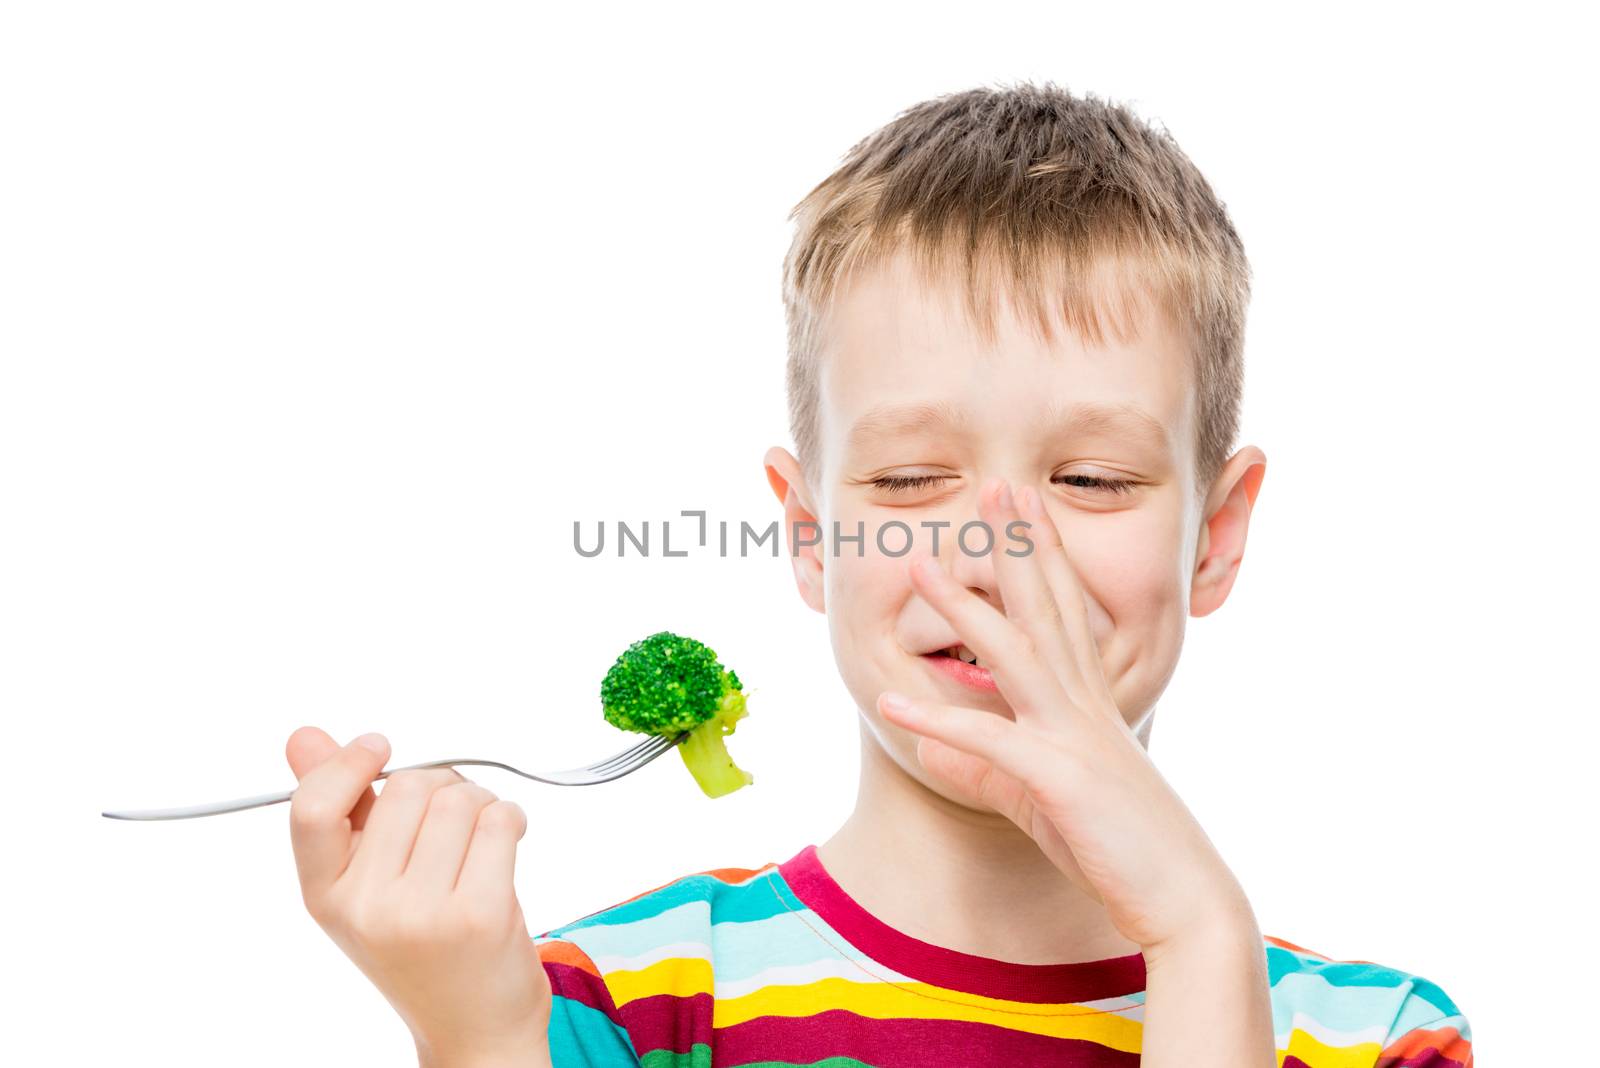 The boy with contempt looks at broccoli, portrait is isolated on by kosmsos111